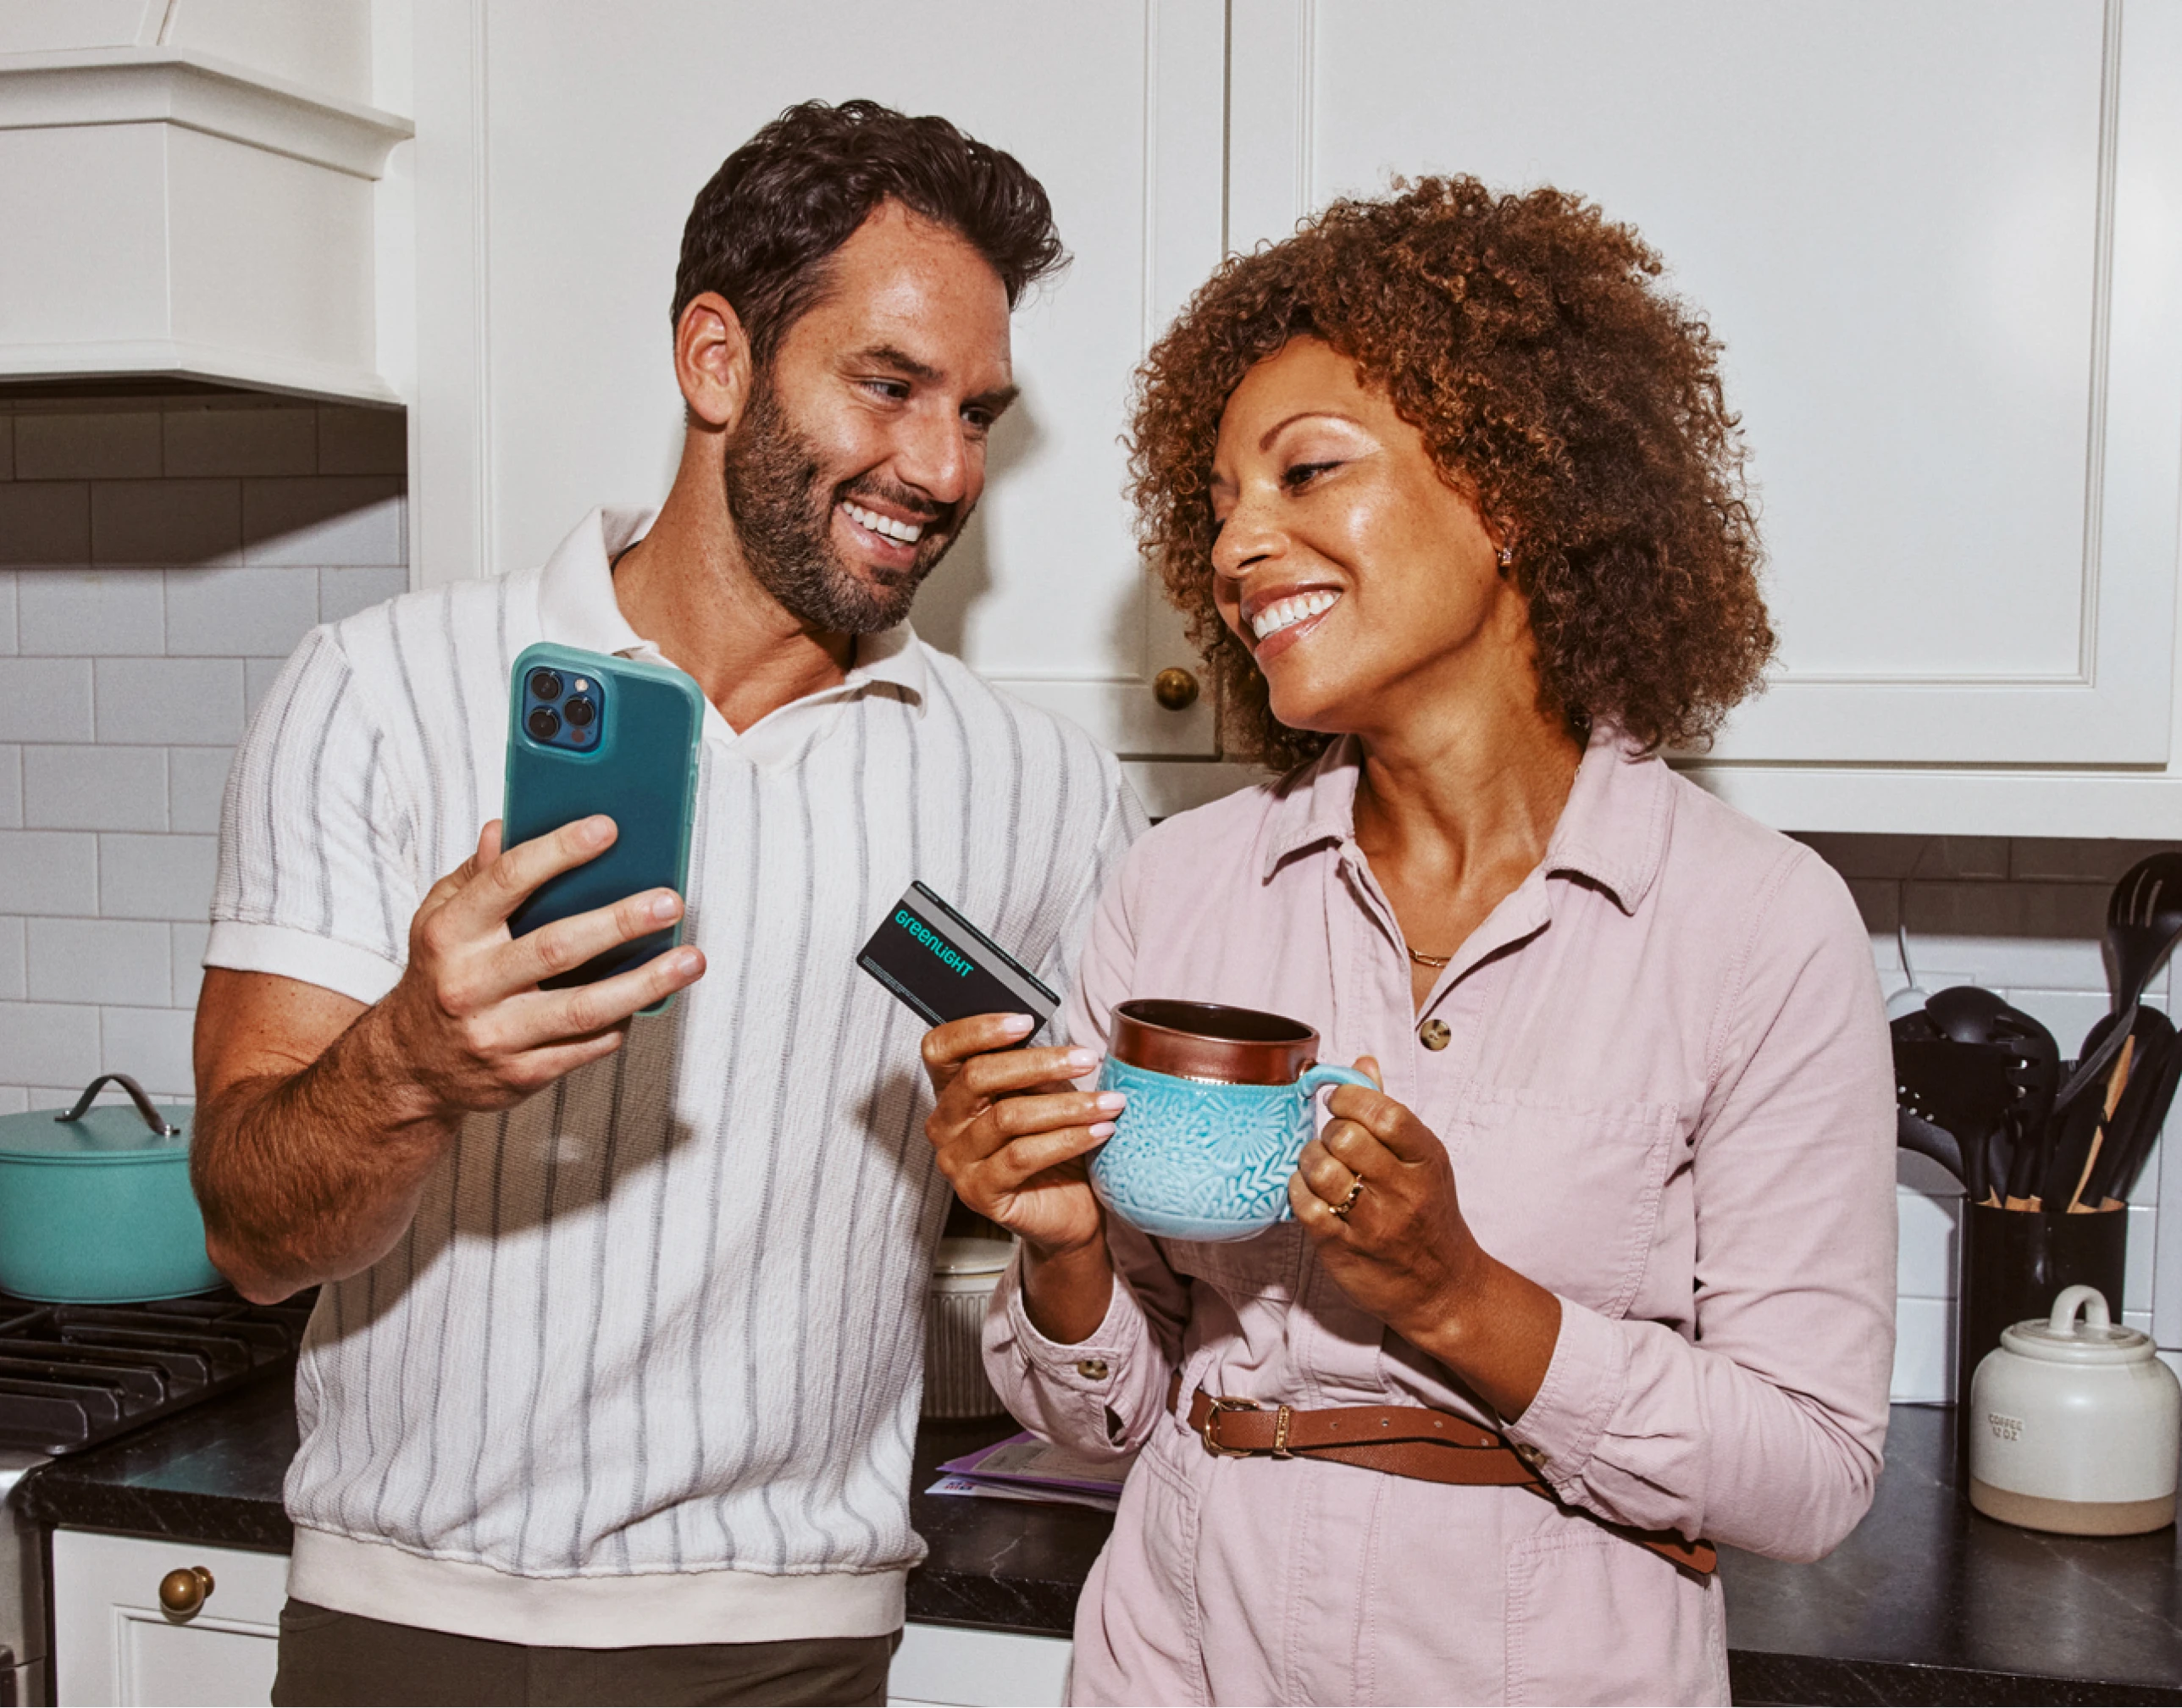 Parents in kitchen looking at phone with debit card and coffee